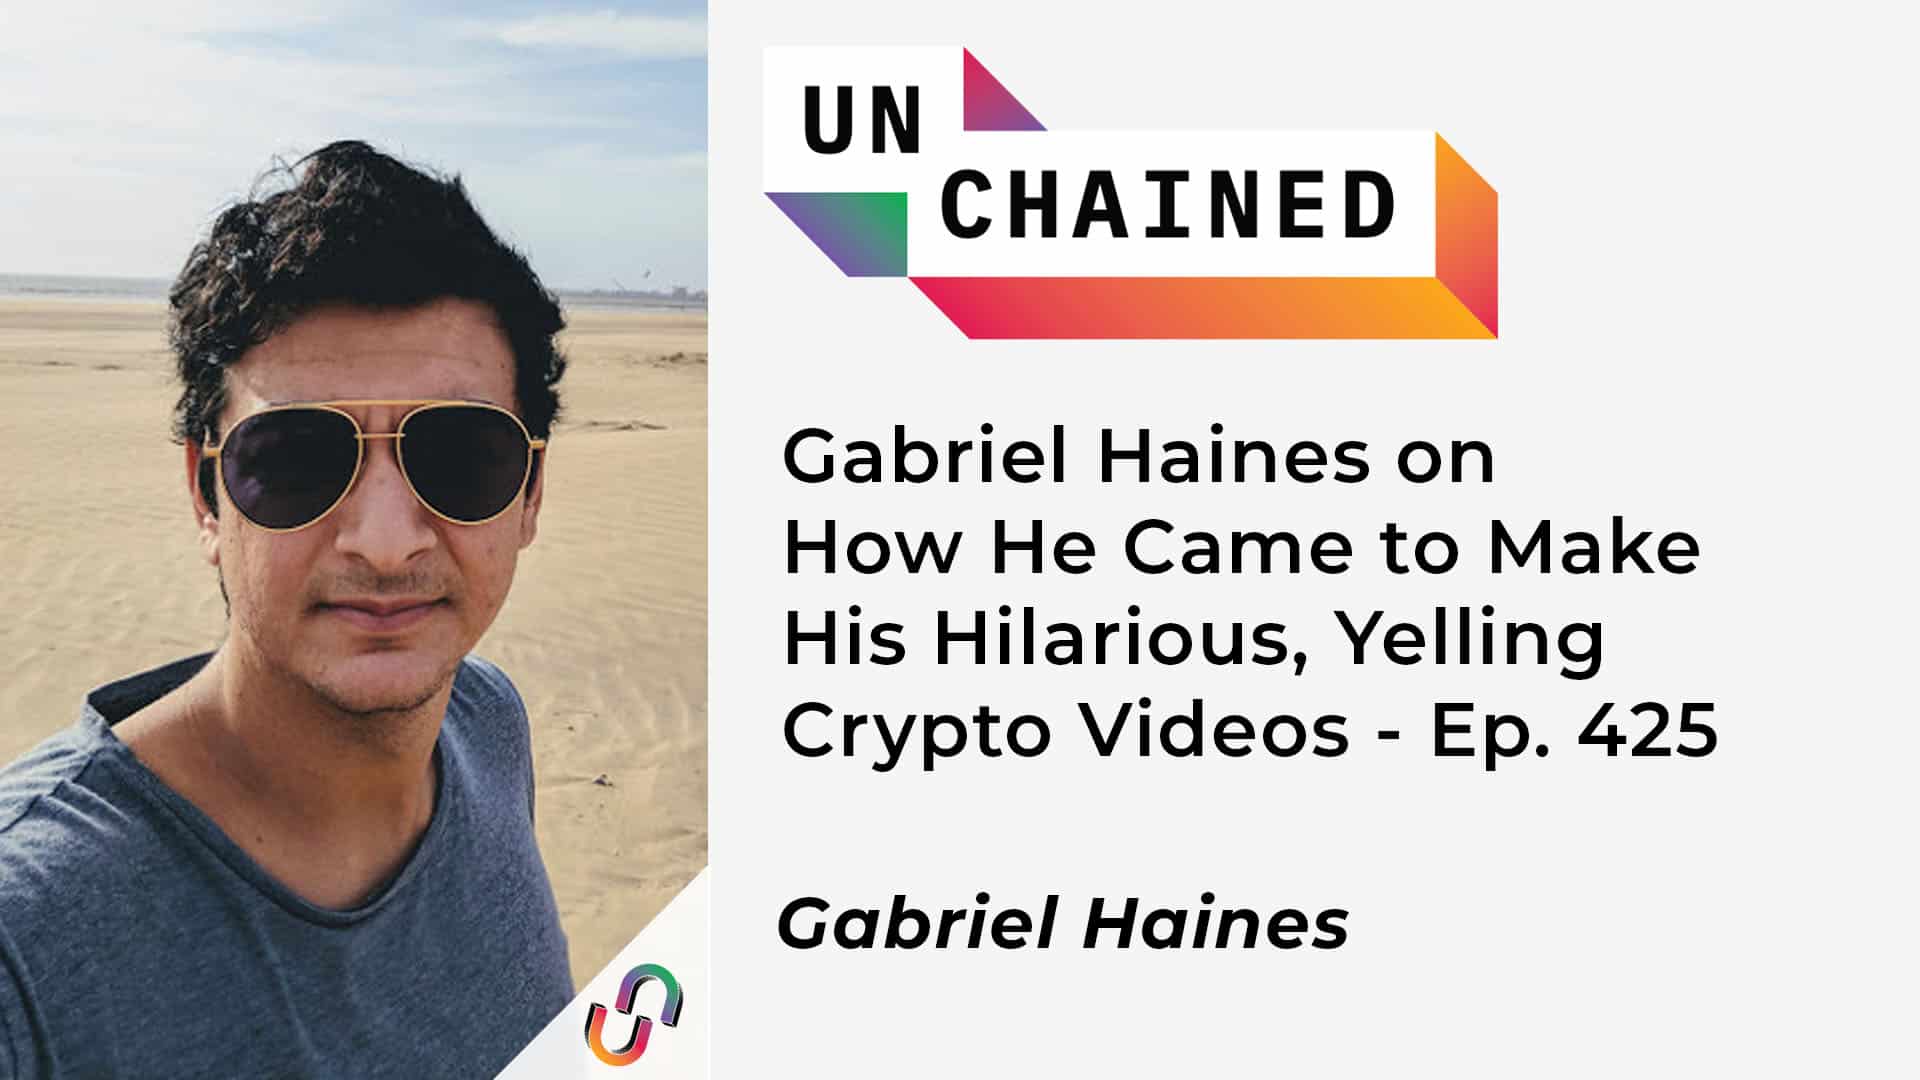 Gabriel Haines on How He Came to Make His Hilarious, Yelling Crypto Videos - Ep. 425